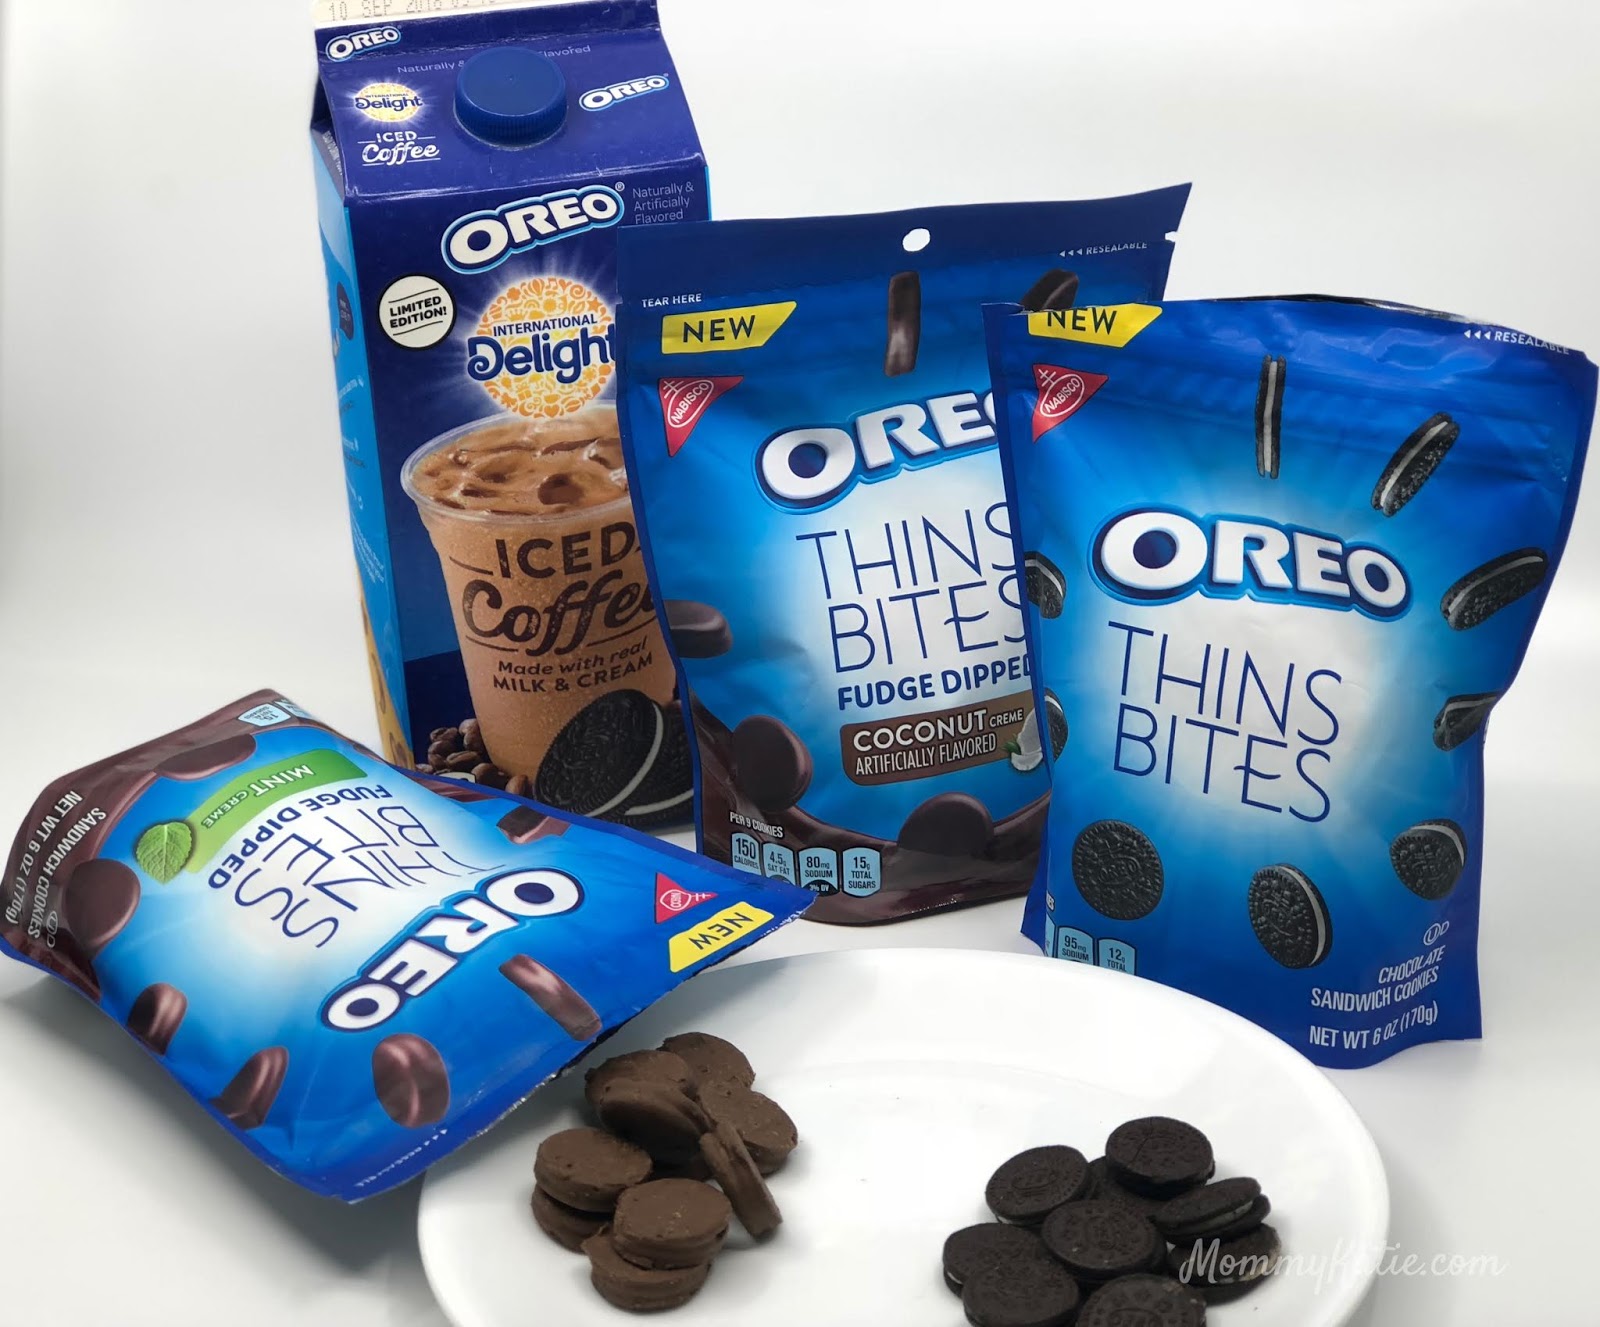 Oreo Thins Bites And Id Oreo Iced Coffee Walmart A Sweet Deal - nom nom cafe interveiw roblox